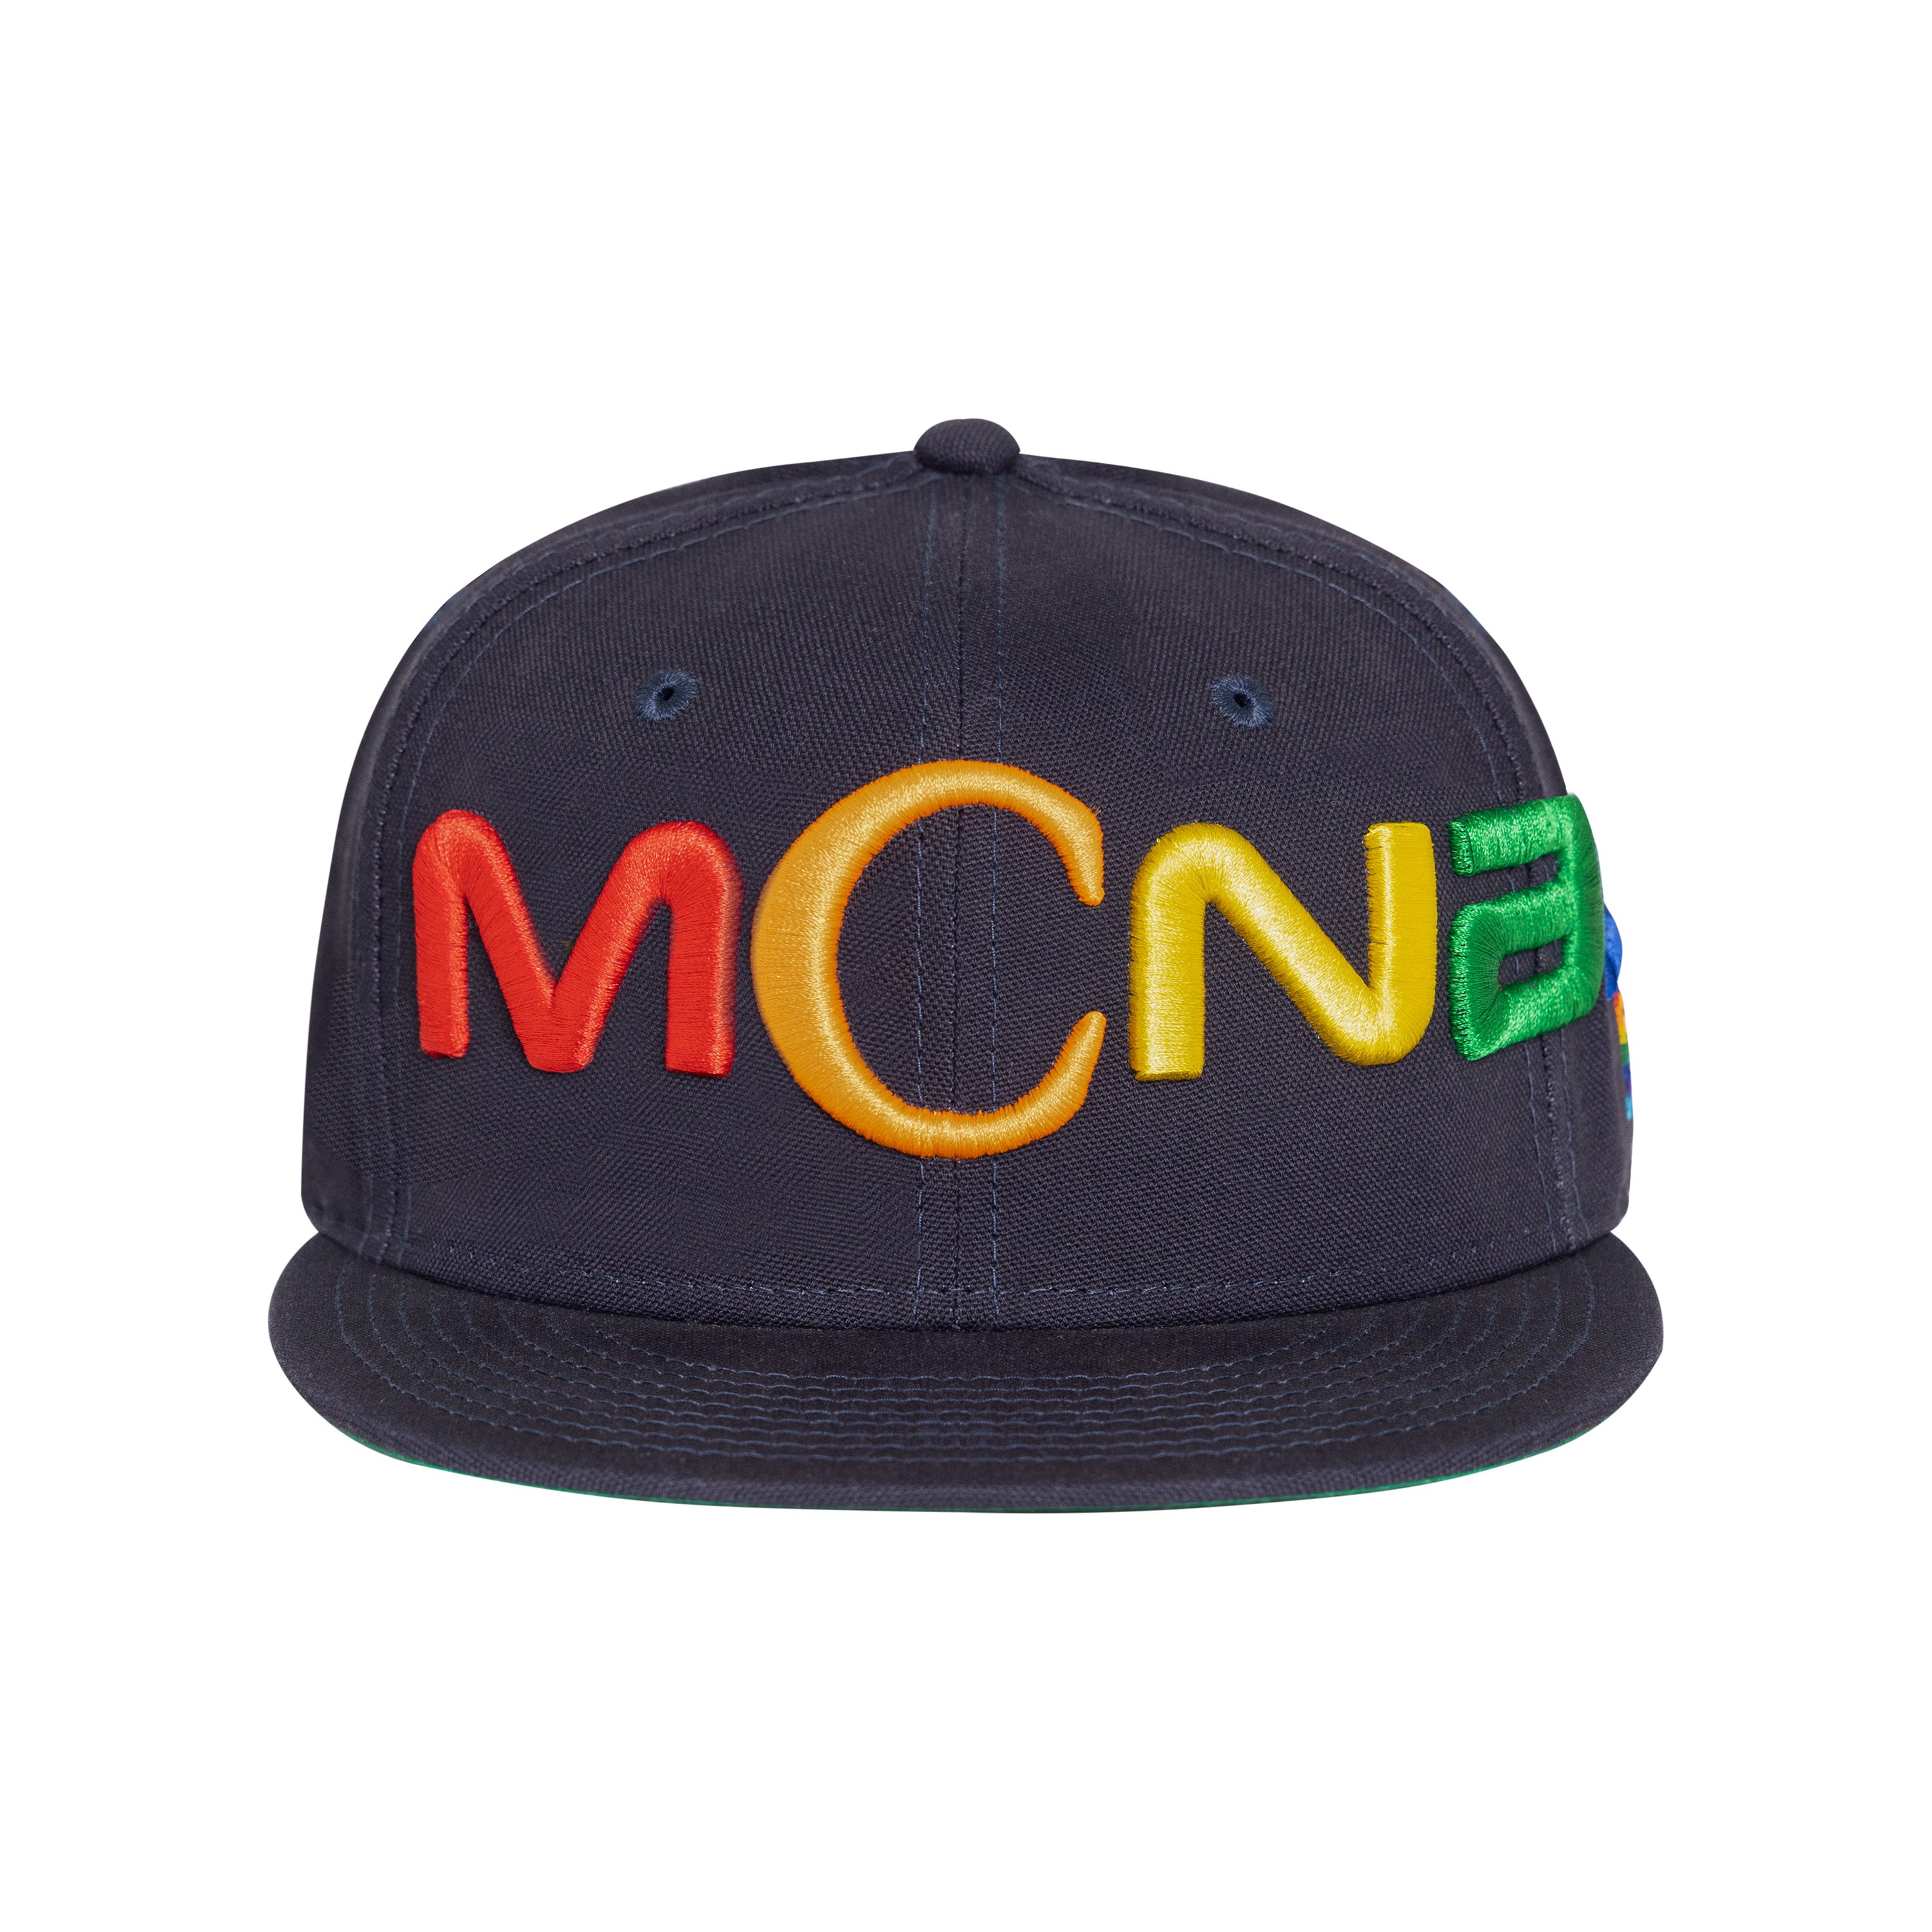 MCNASTY NEW ERA 59/50 FITTED - NAVY